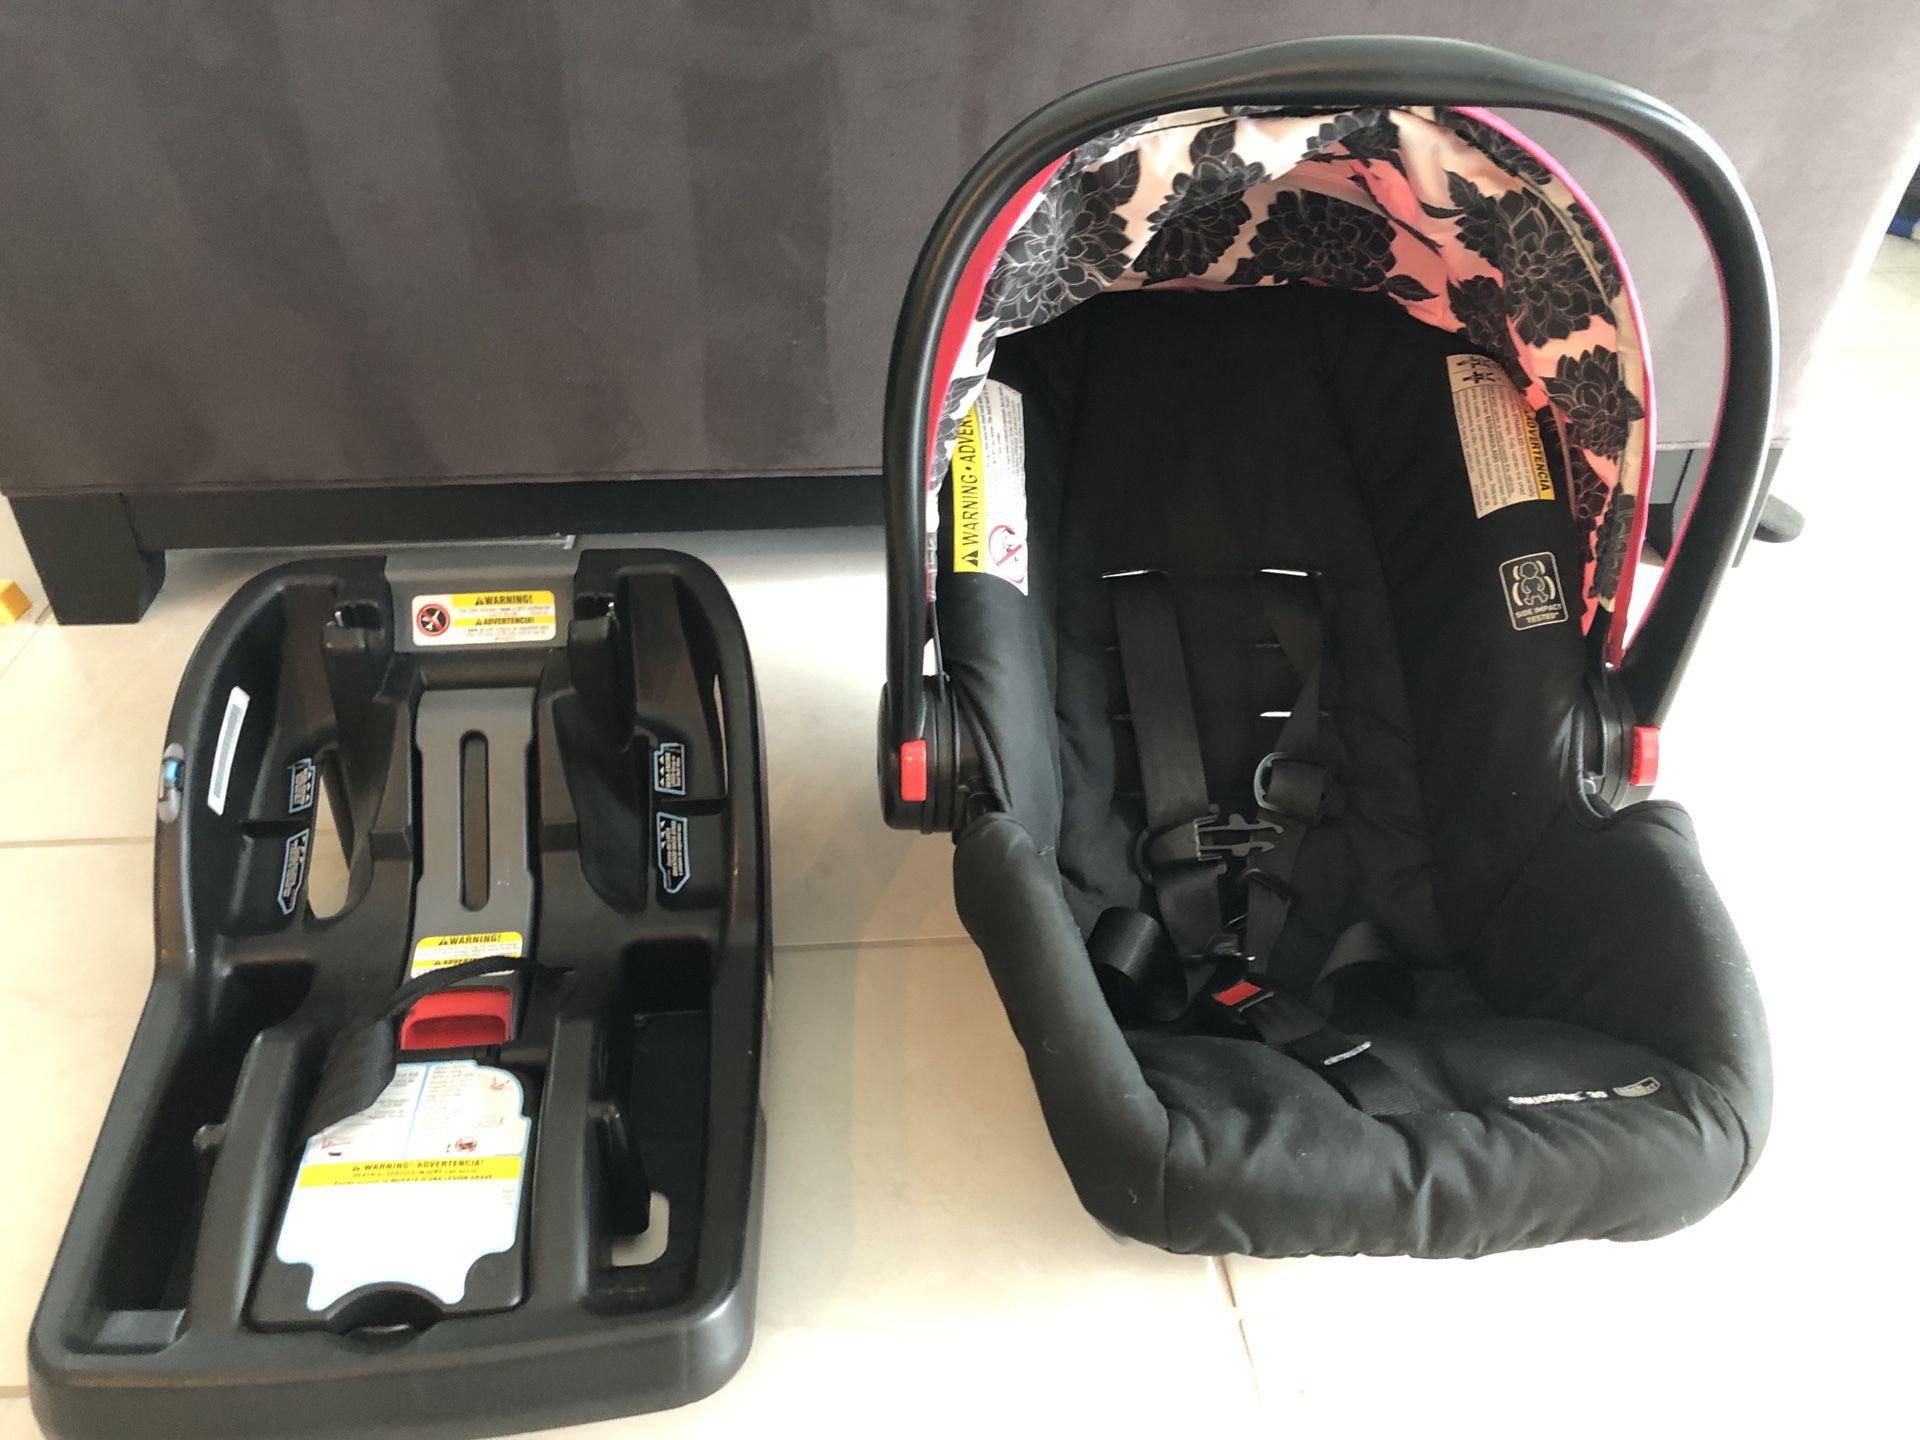 Graco carseat and base